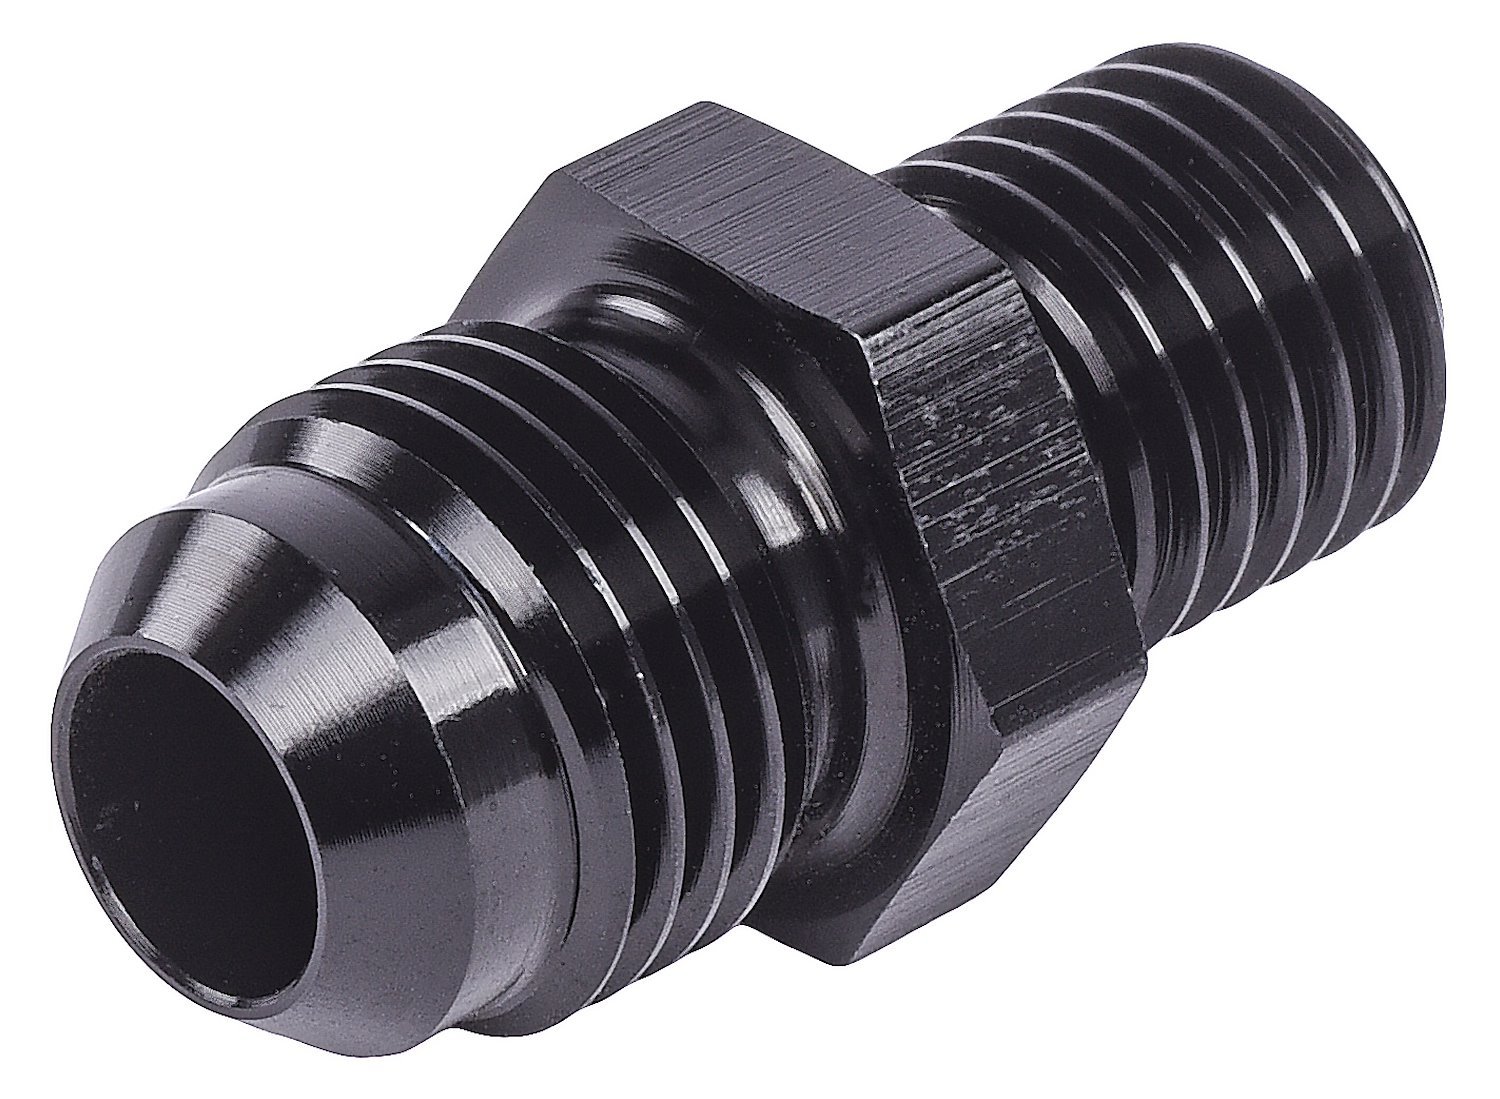 AN to Metric Adapter Fitting [-6 AN Male to 12mm x 1.5 Male, Black]